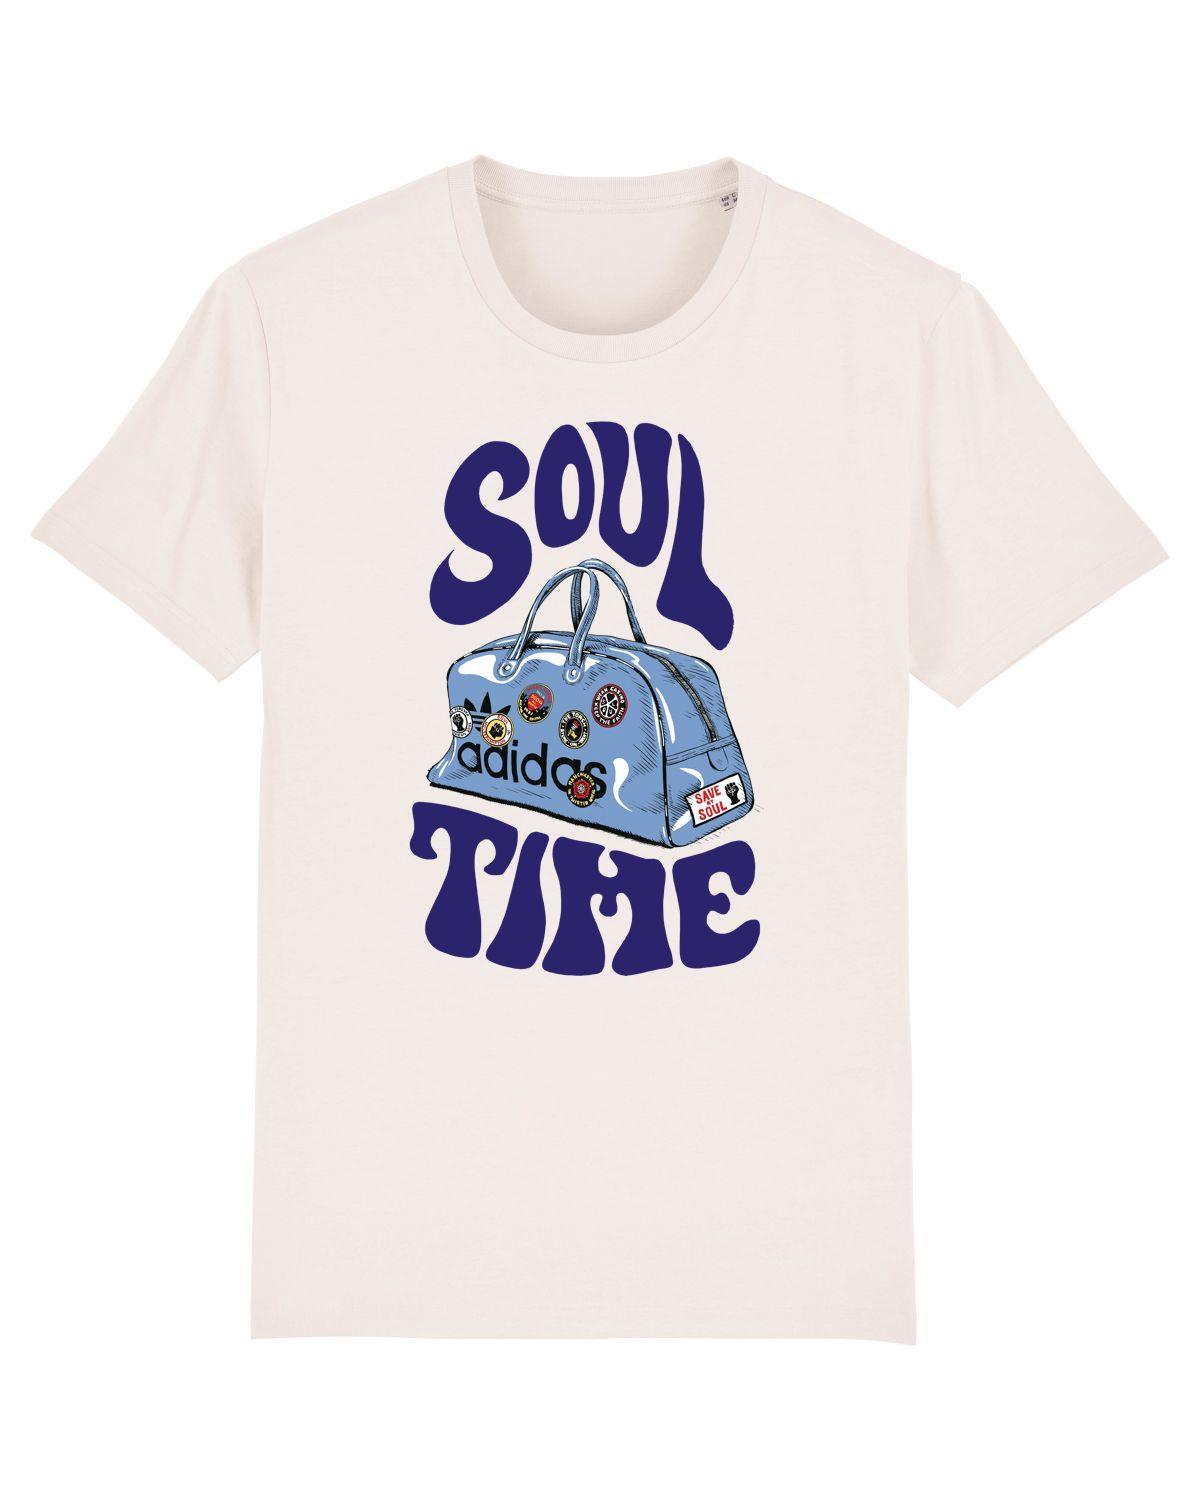 SOUL TIME: T-Shirt Inspired by Northern Soul Allnighters (3 Colours) - Suit Yourself Music